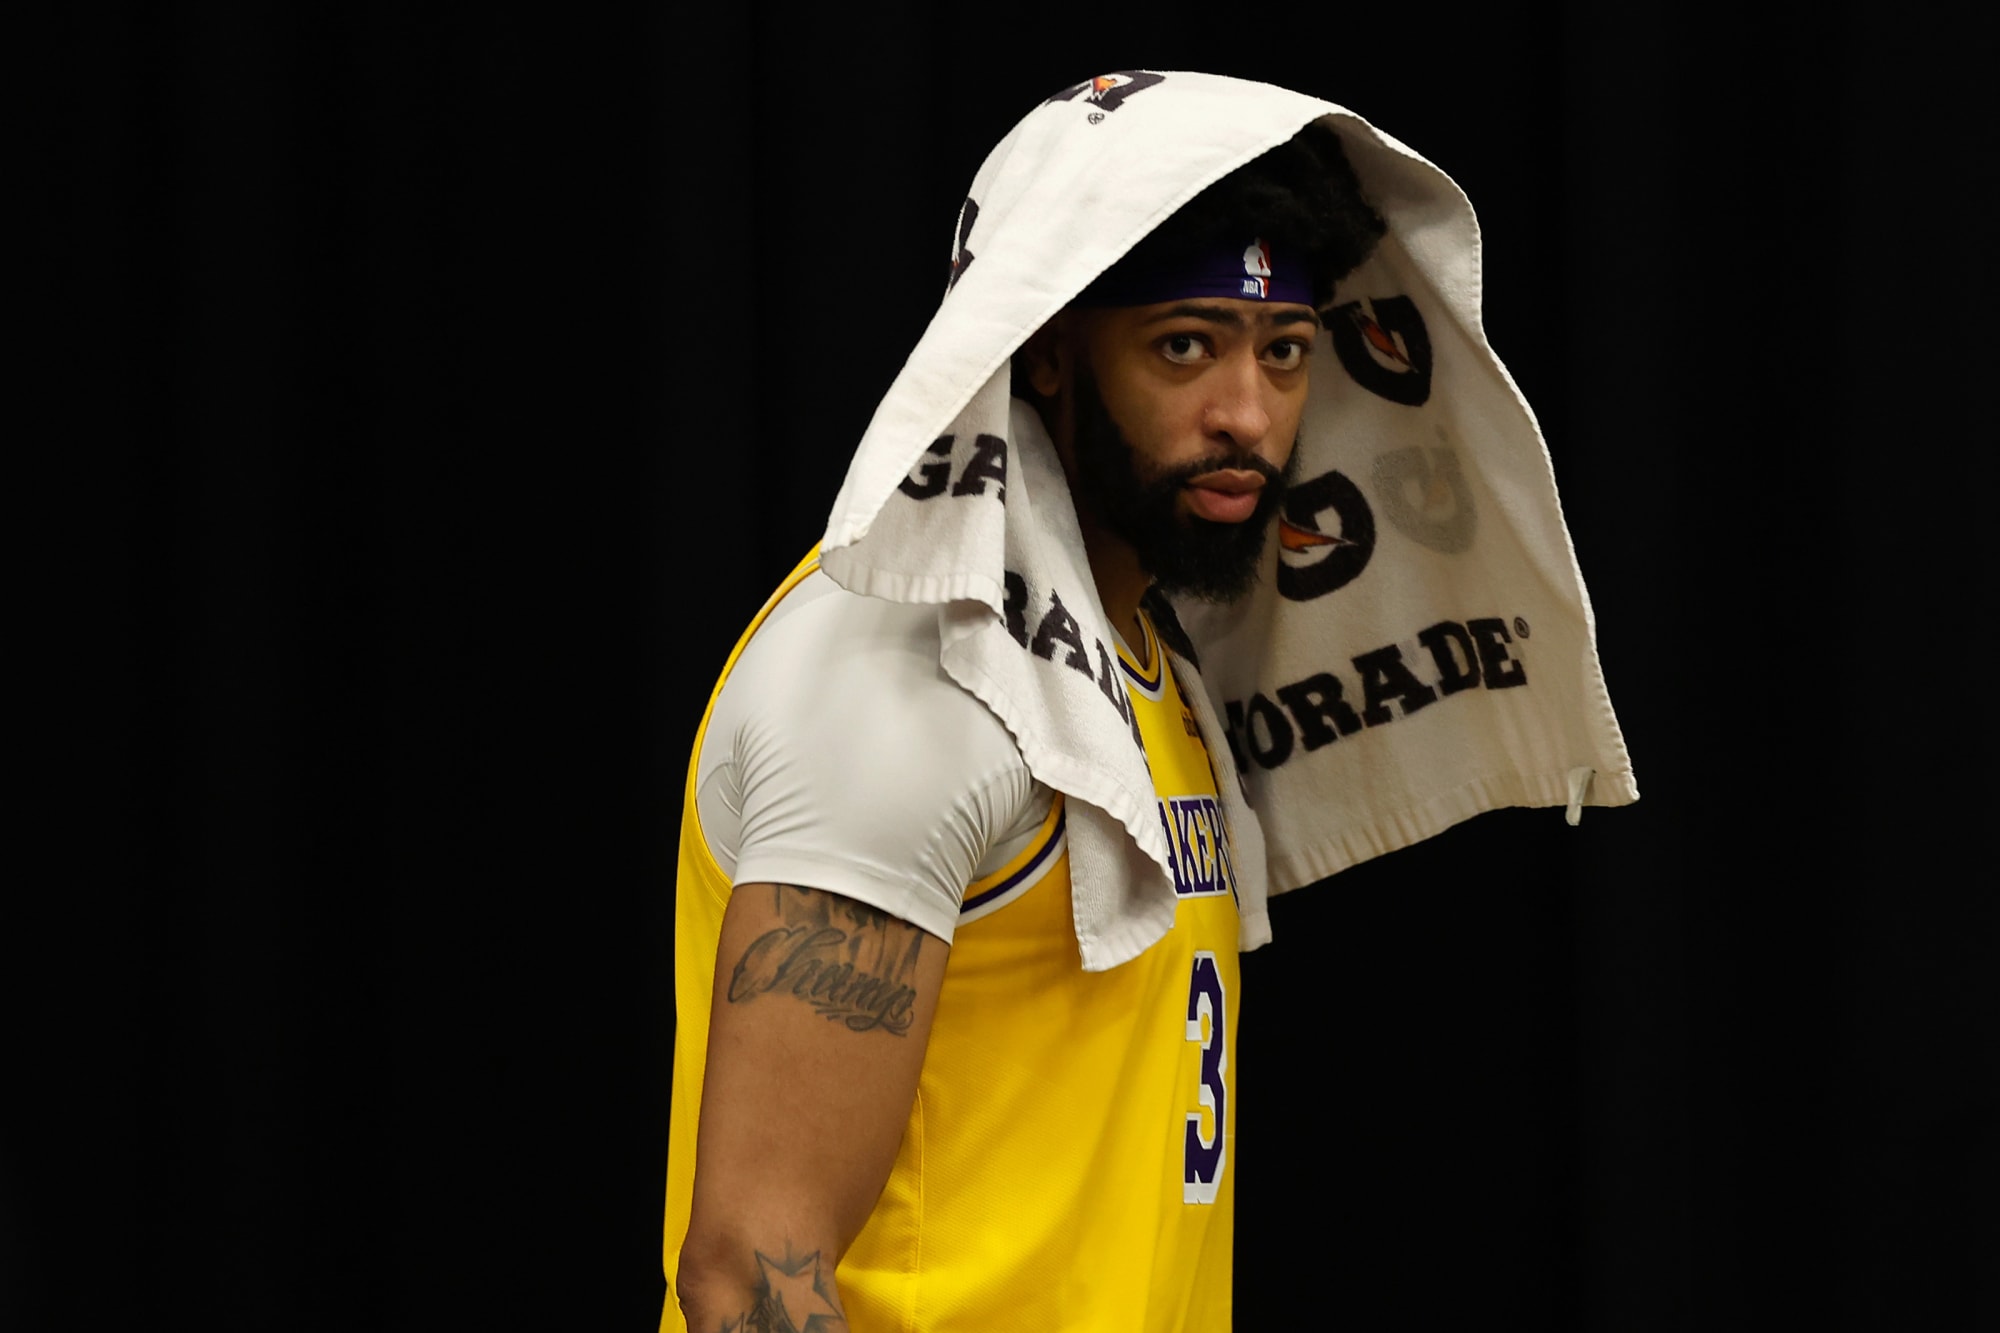 2022-23 season will decide Anthony Davis’ future with the Lakers